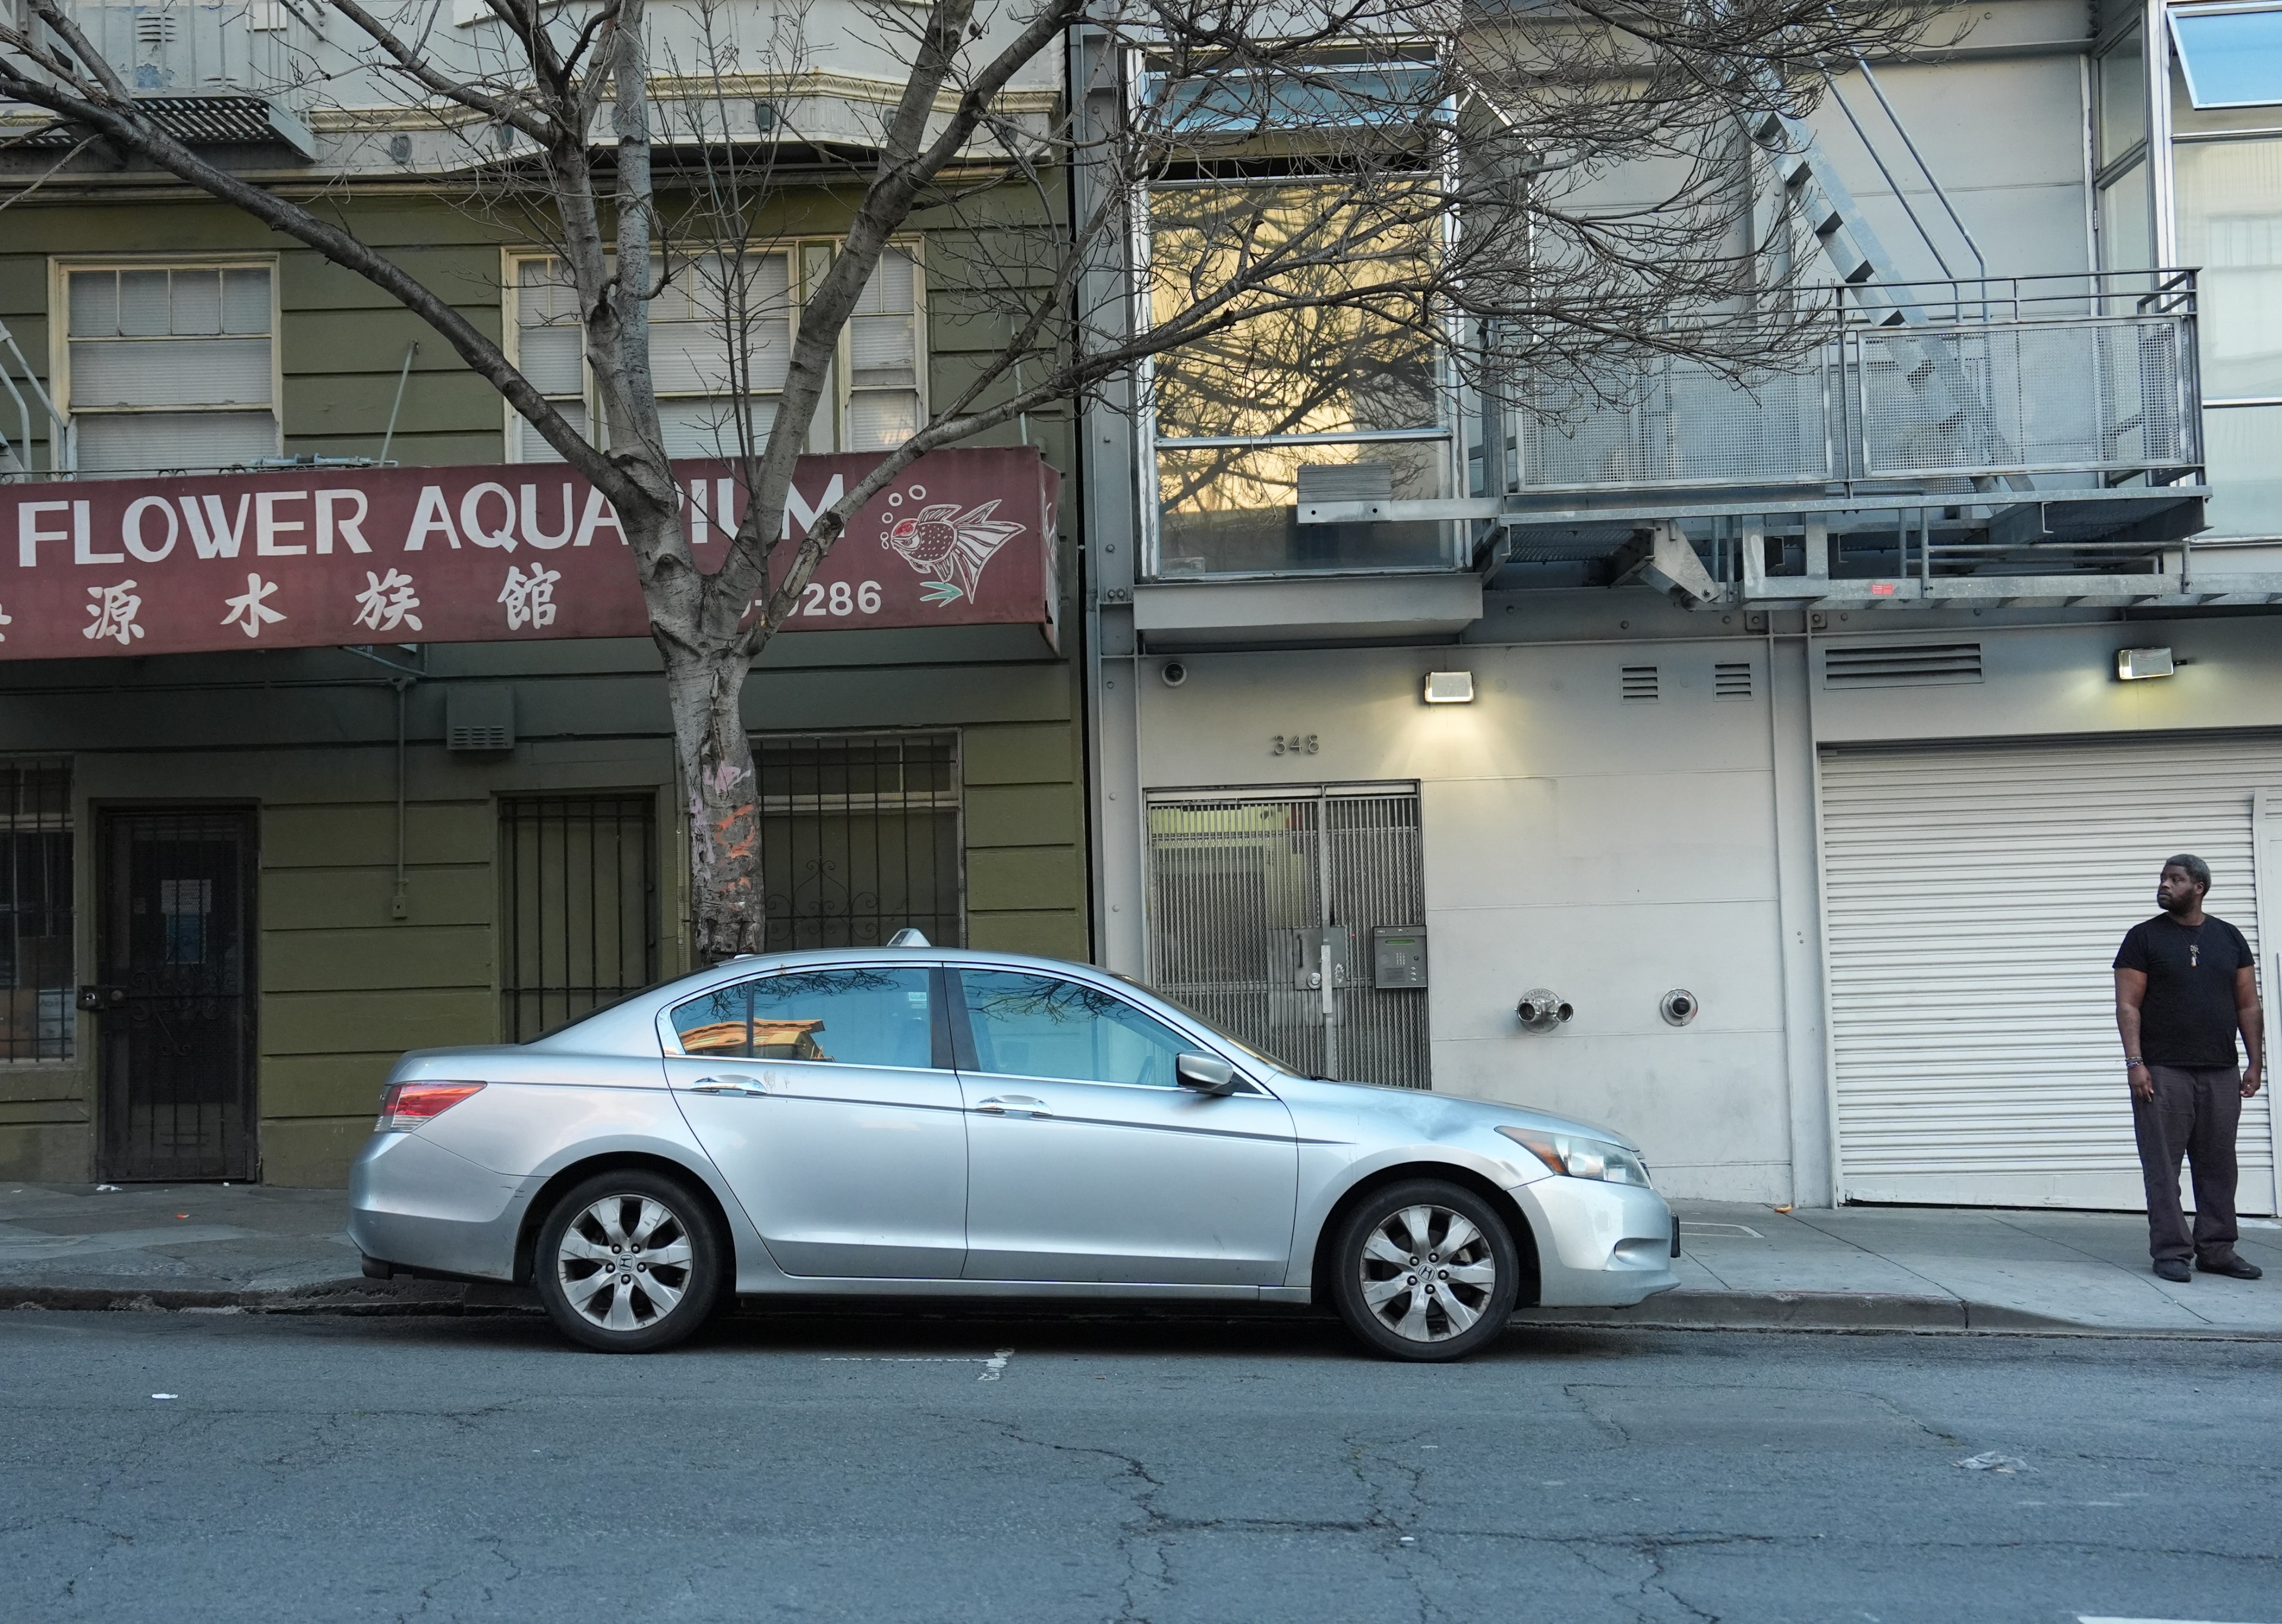 A silver car is parked on a street in front of a building with a &quot;Flower Aquarium&quot; sign; a man stands on the sidewalk to the right.